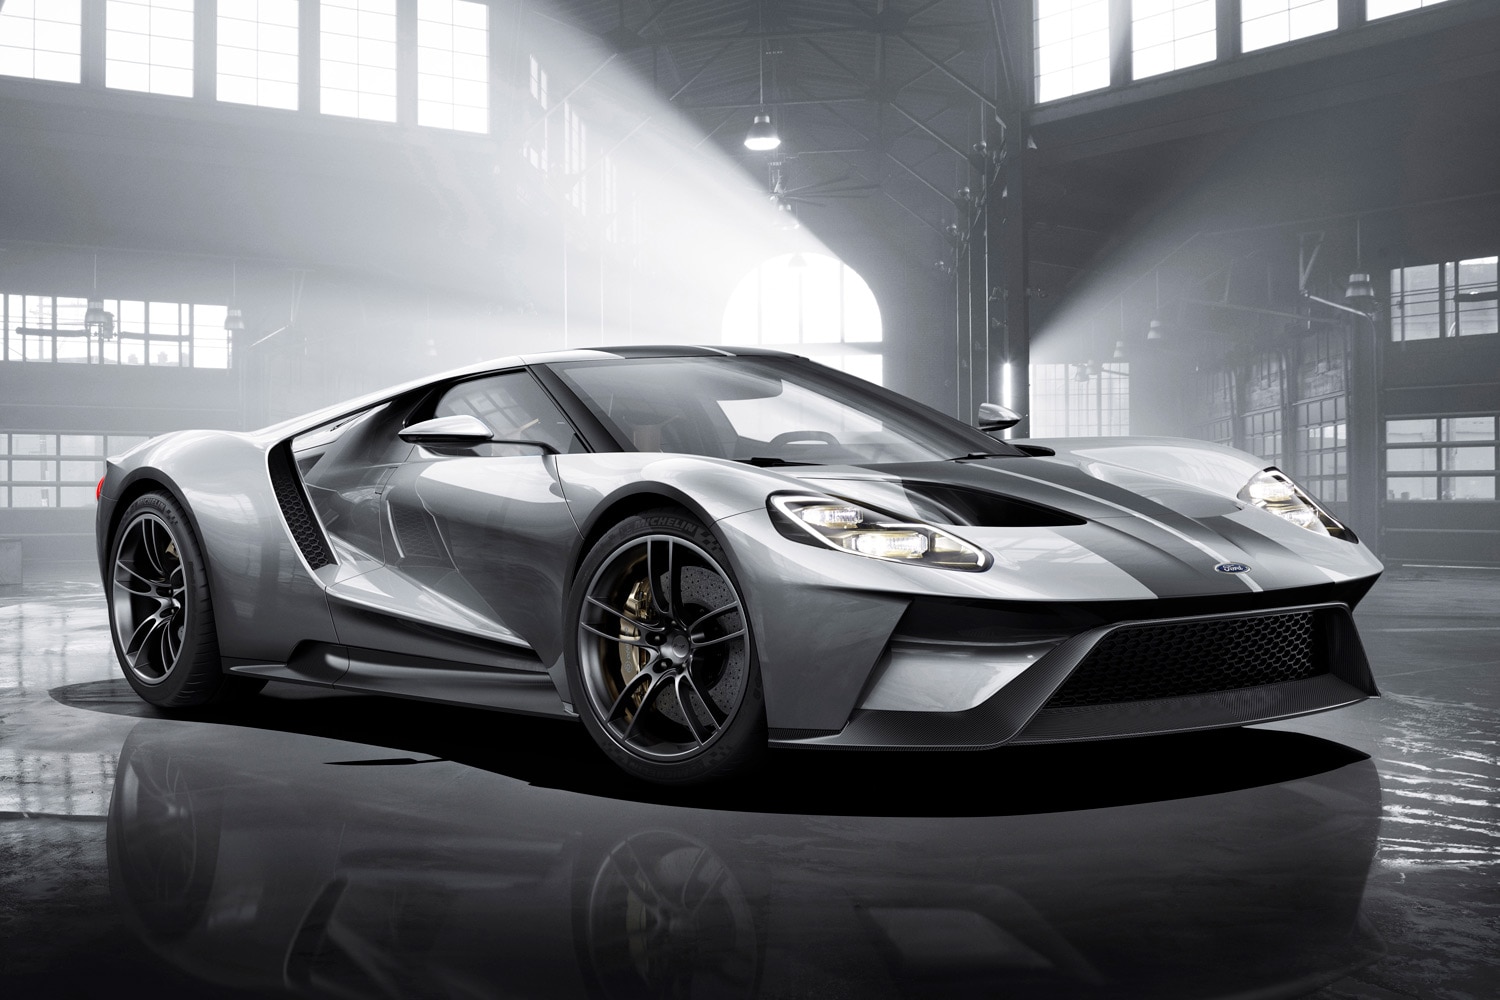 A silver Ford GT